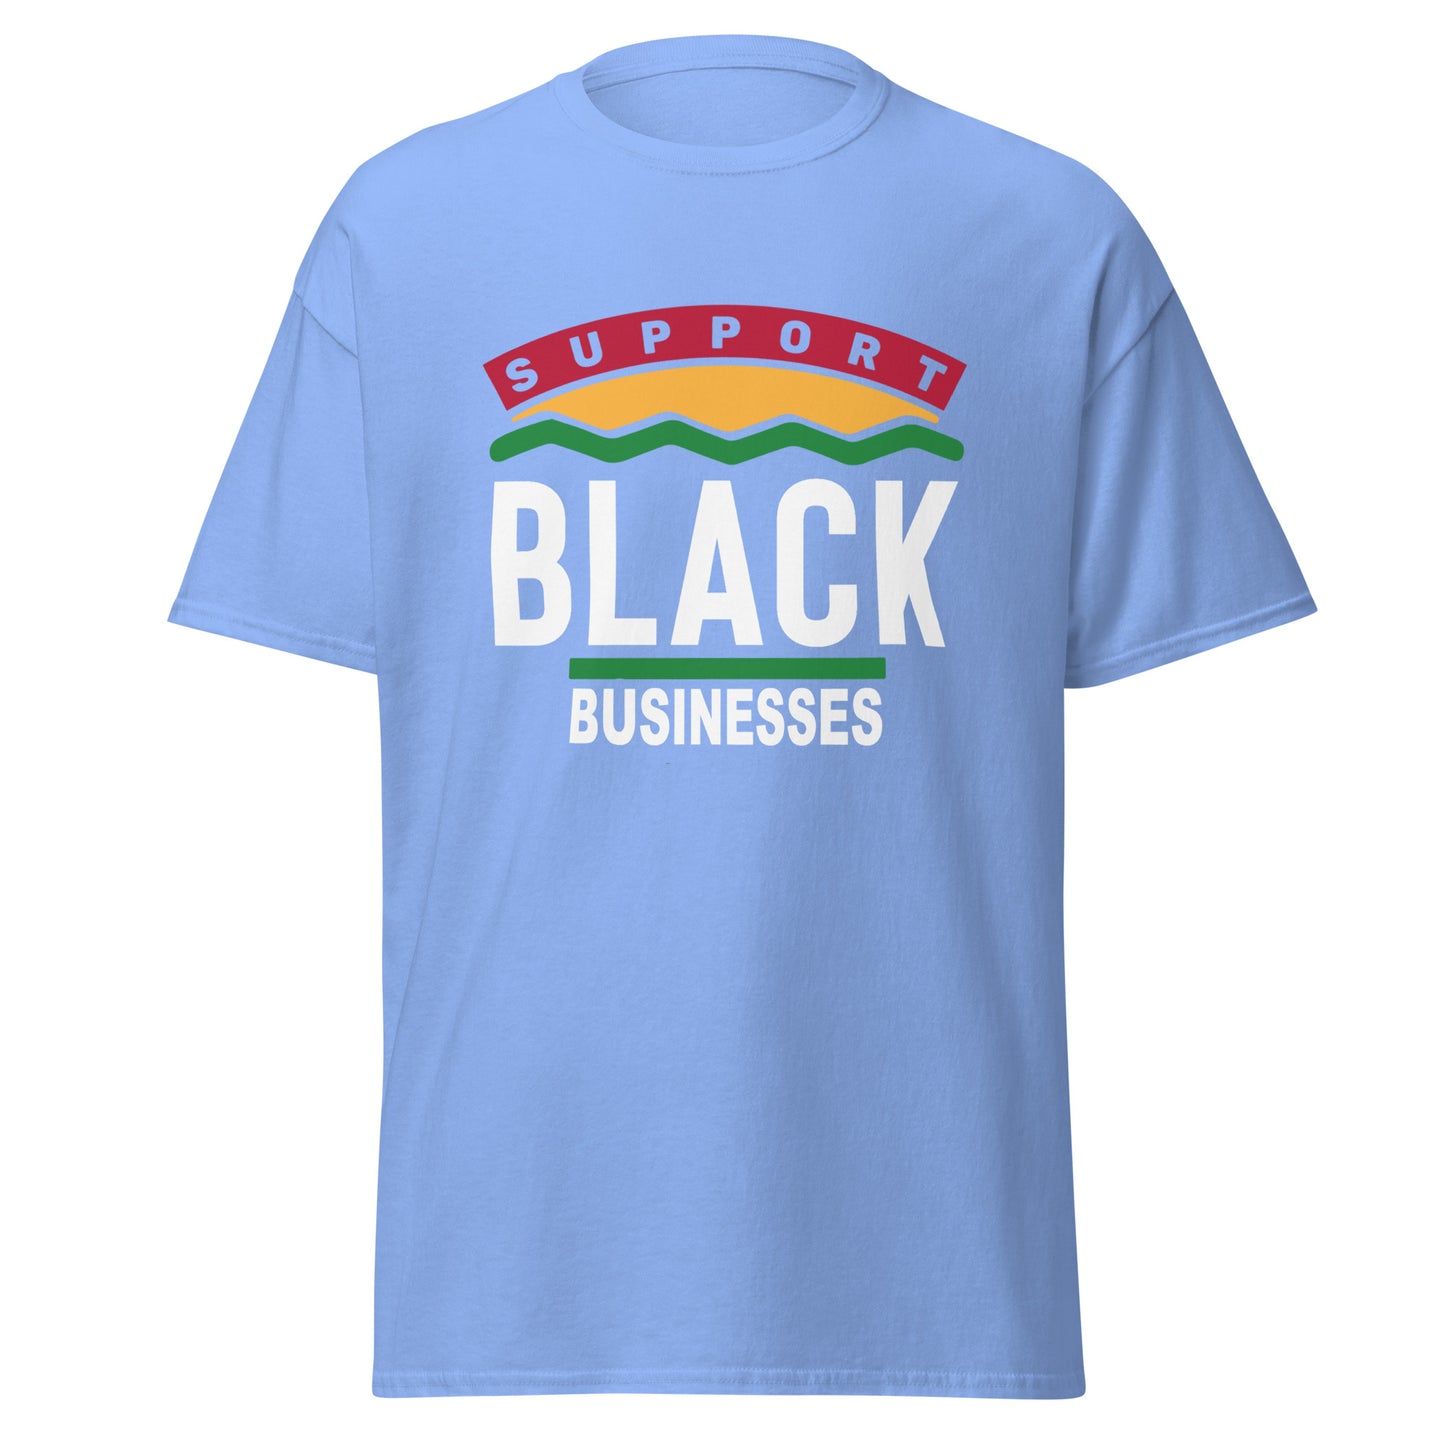 NEW SUPPORT BLACK BUSINESS!!!